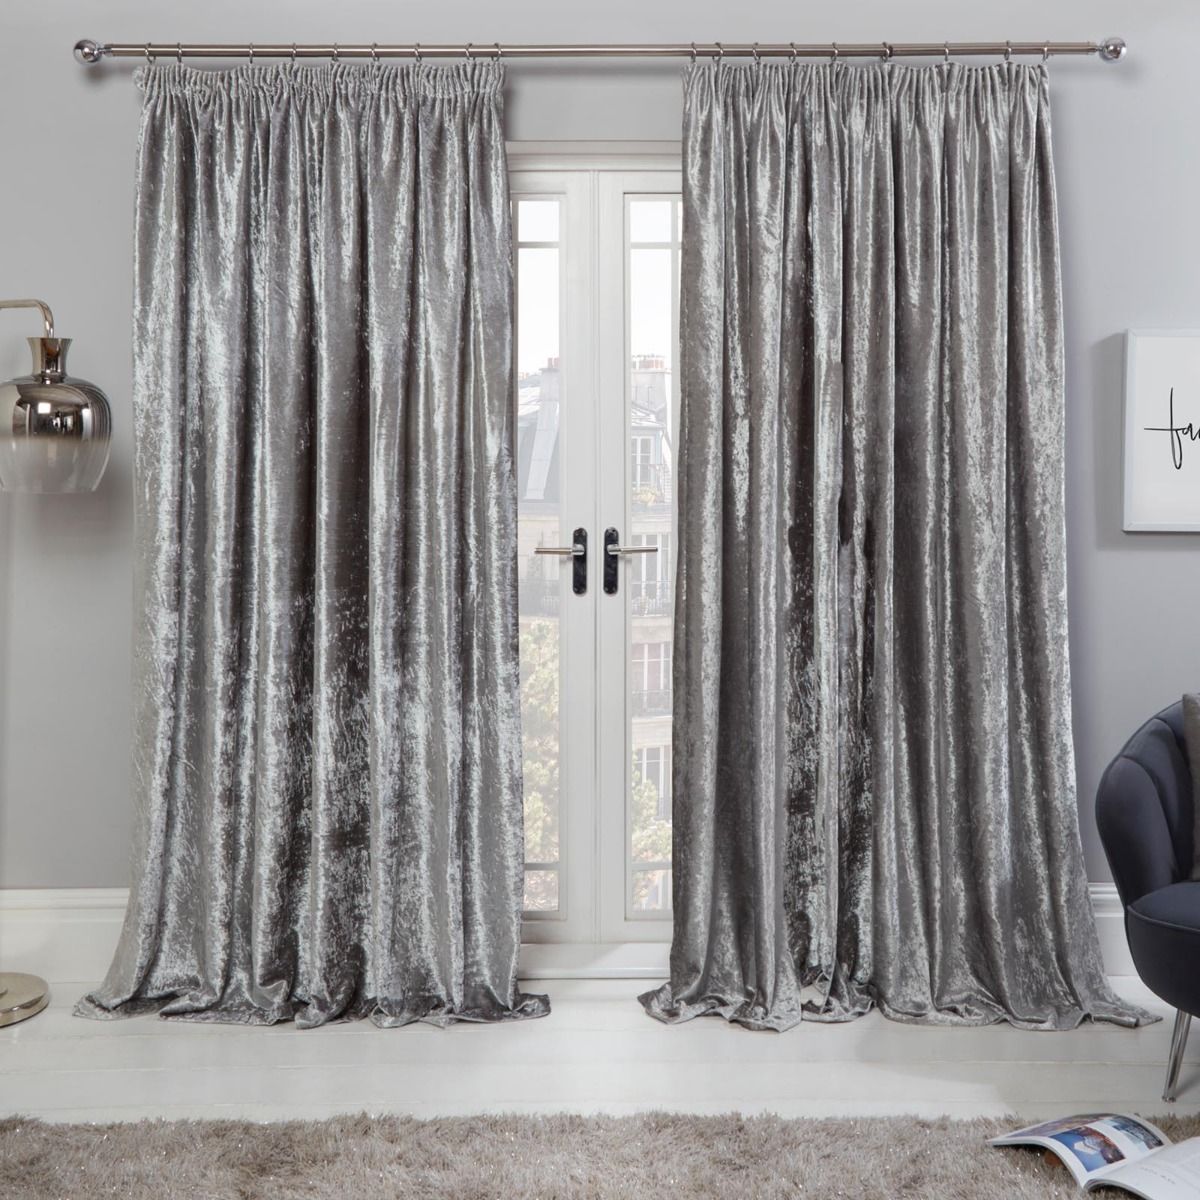 Sienna Crushed Velvet Pencil Pleat Curtains - Silver